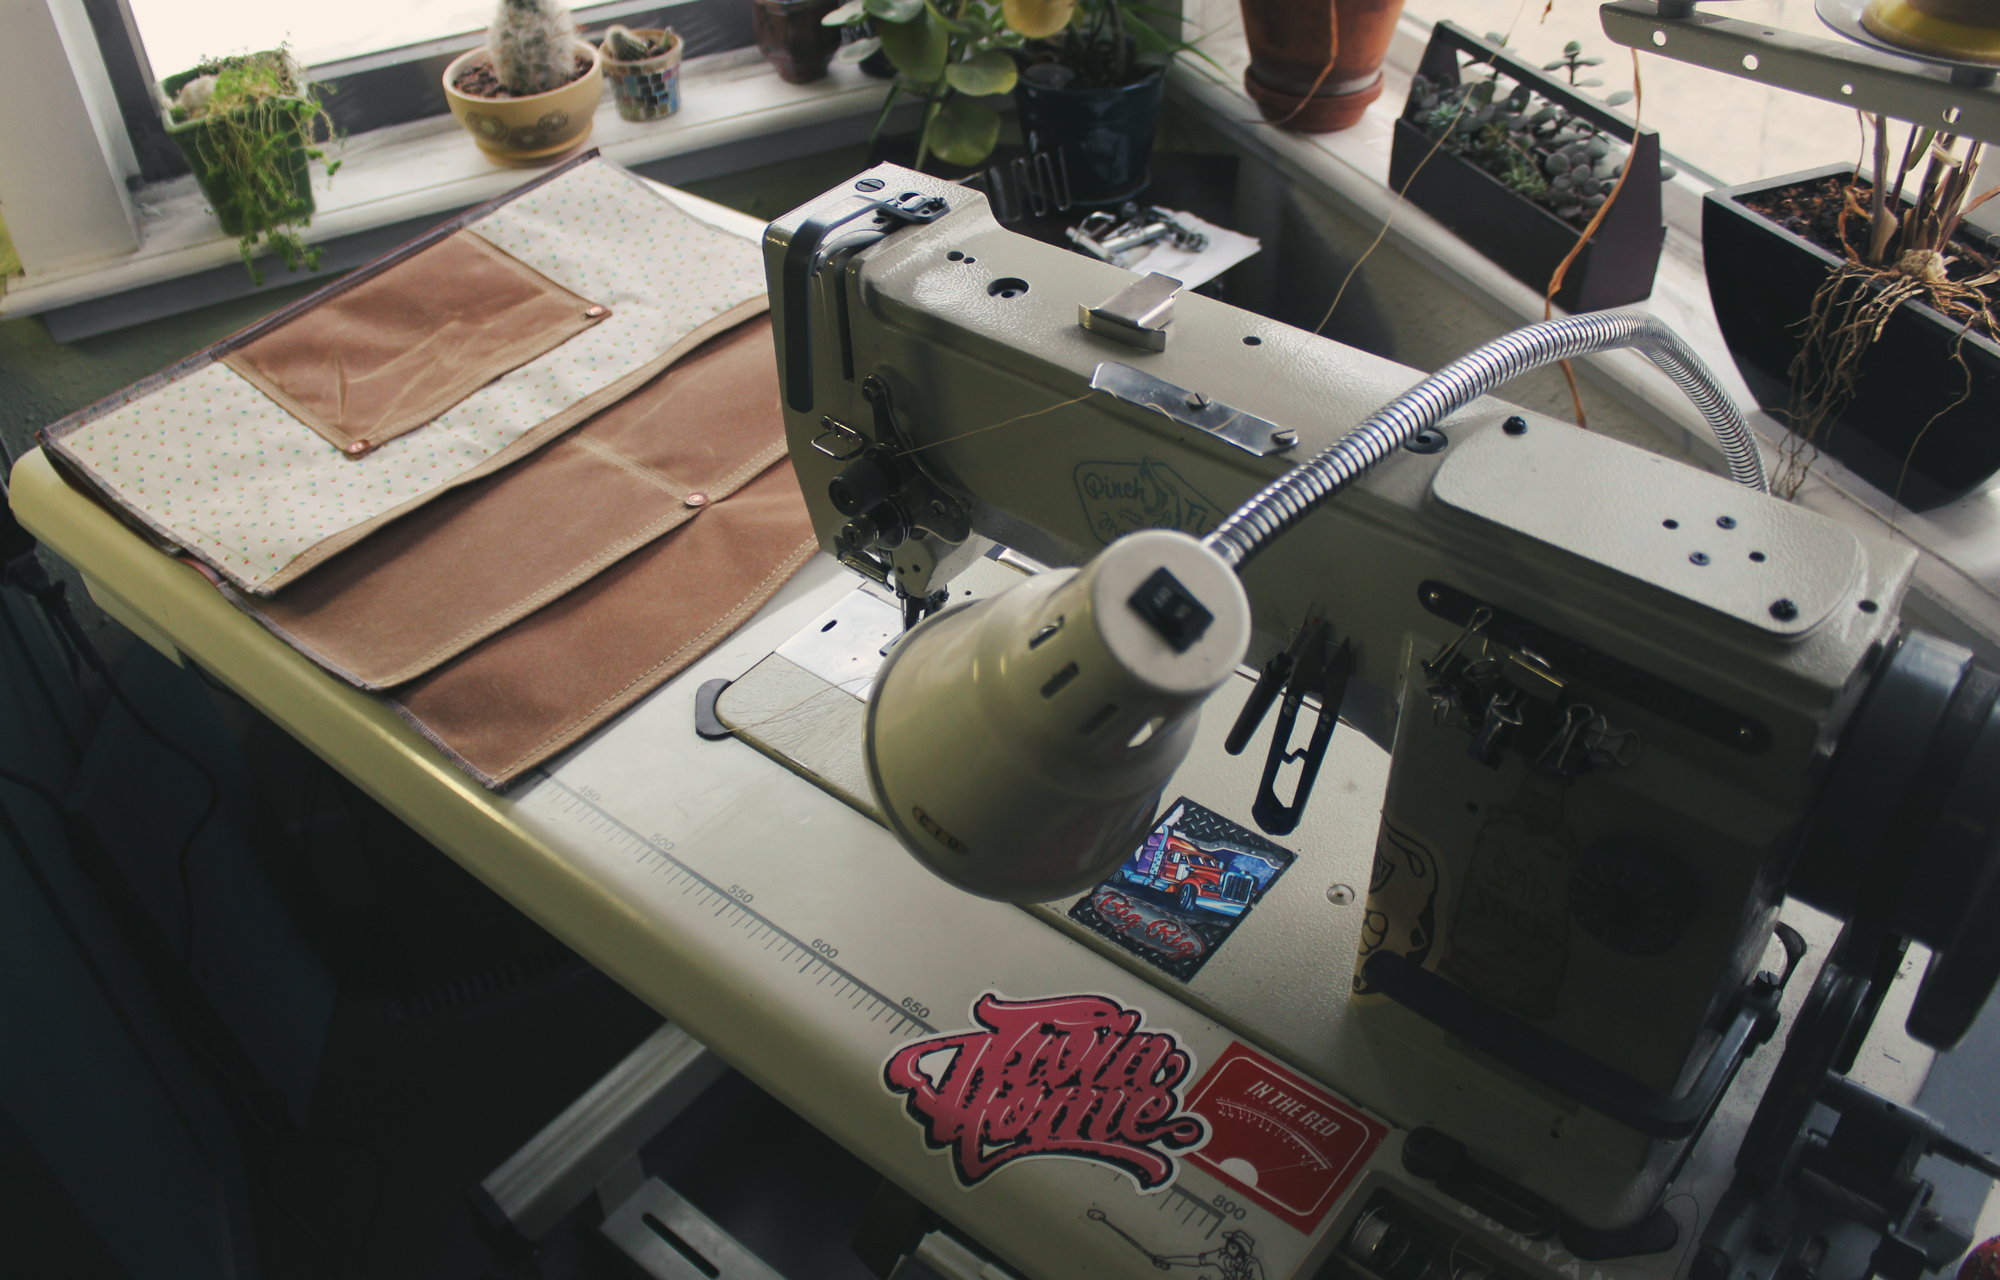 Canvas industrial sewing machine